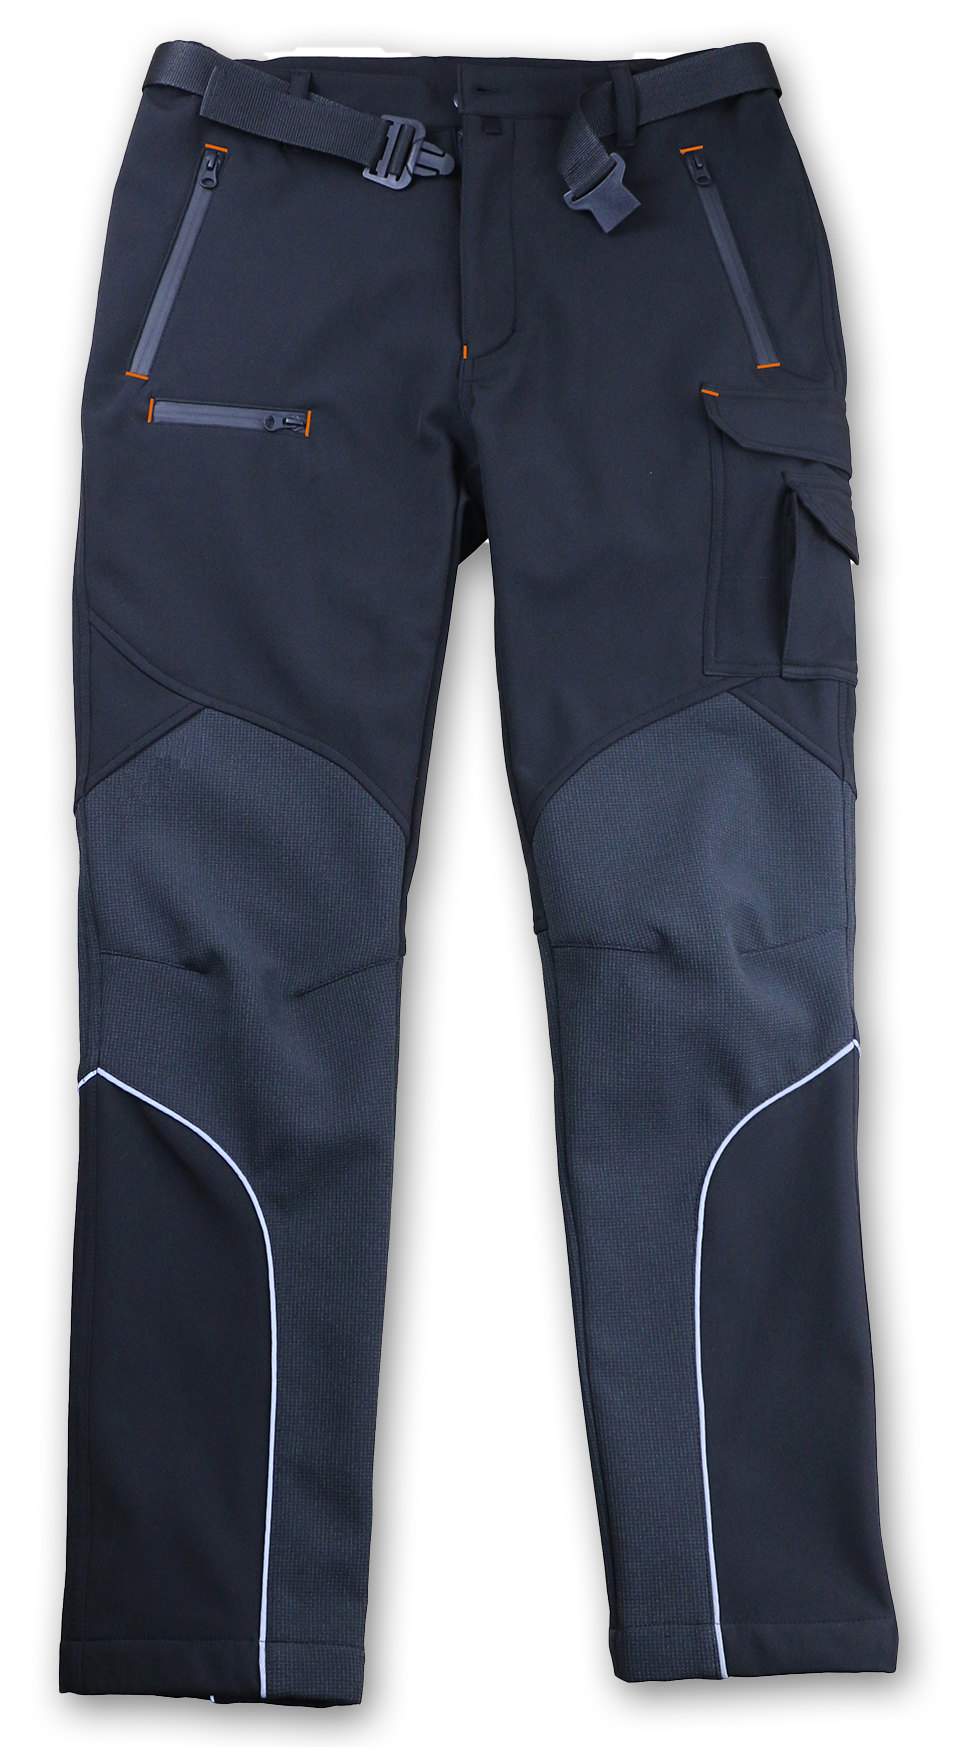 S7030 softshell trousers